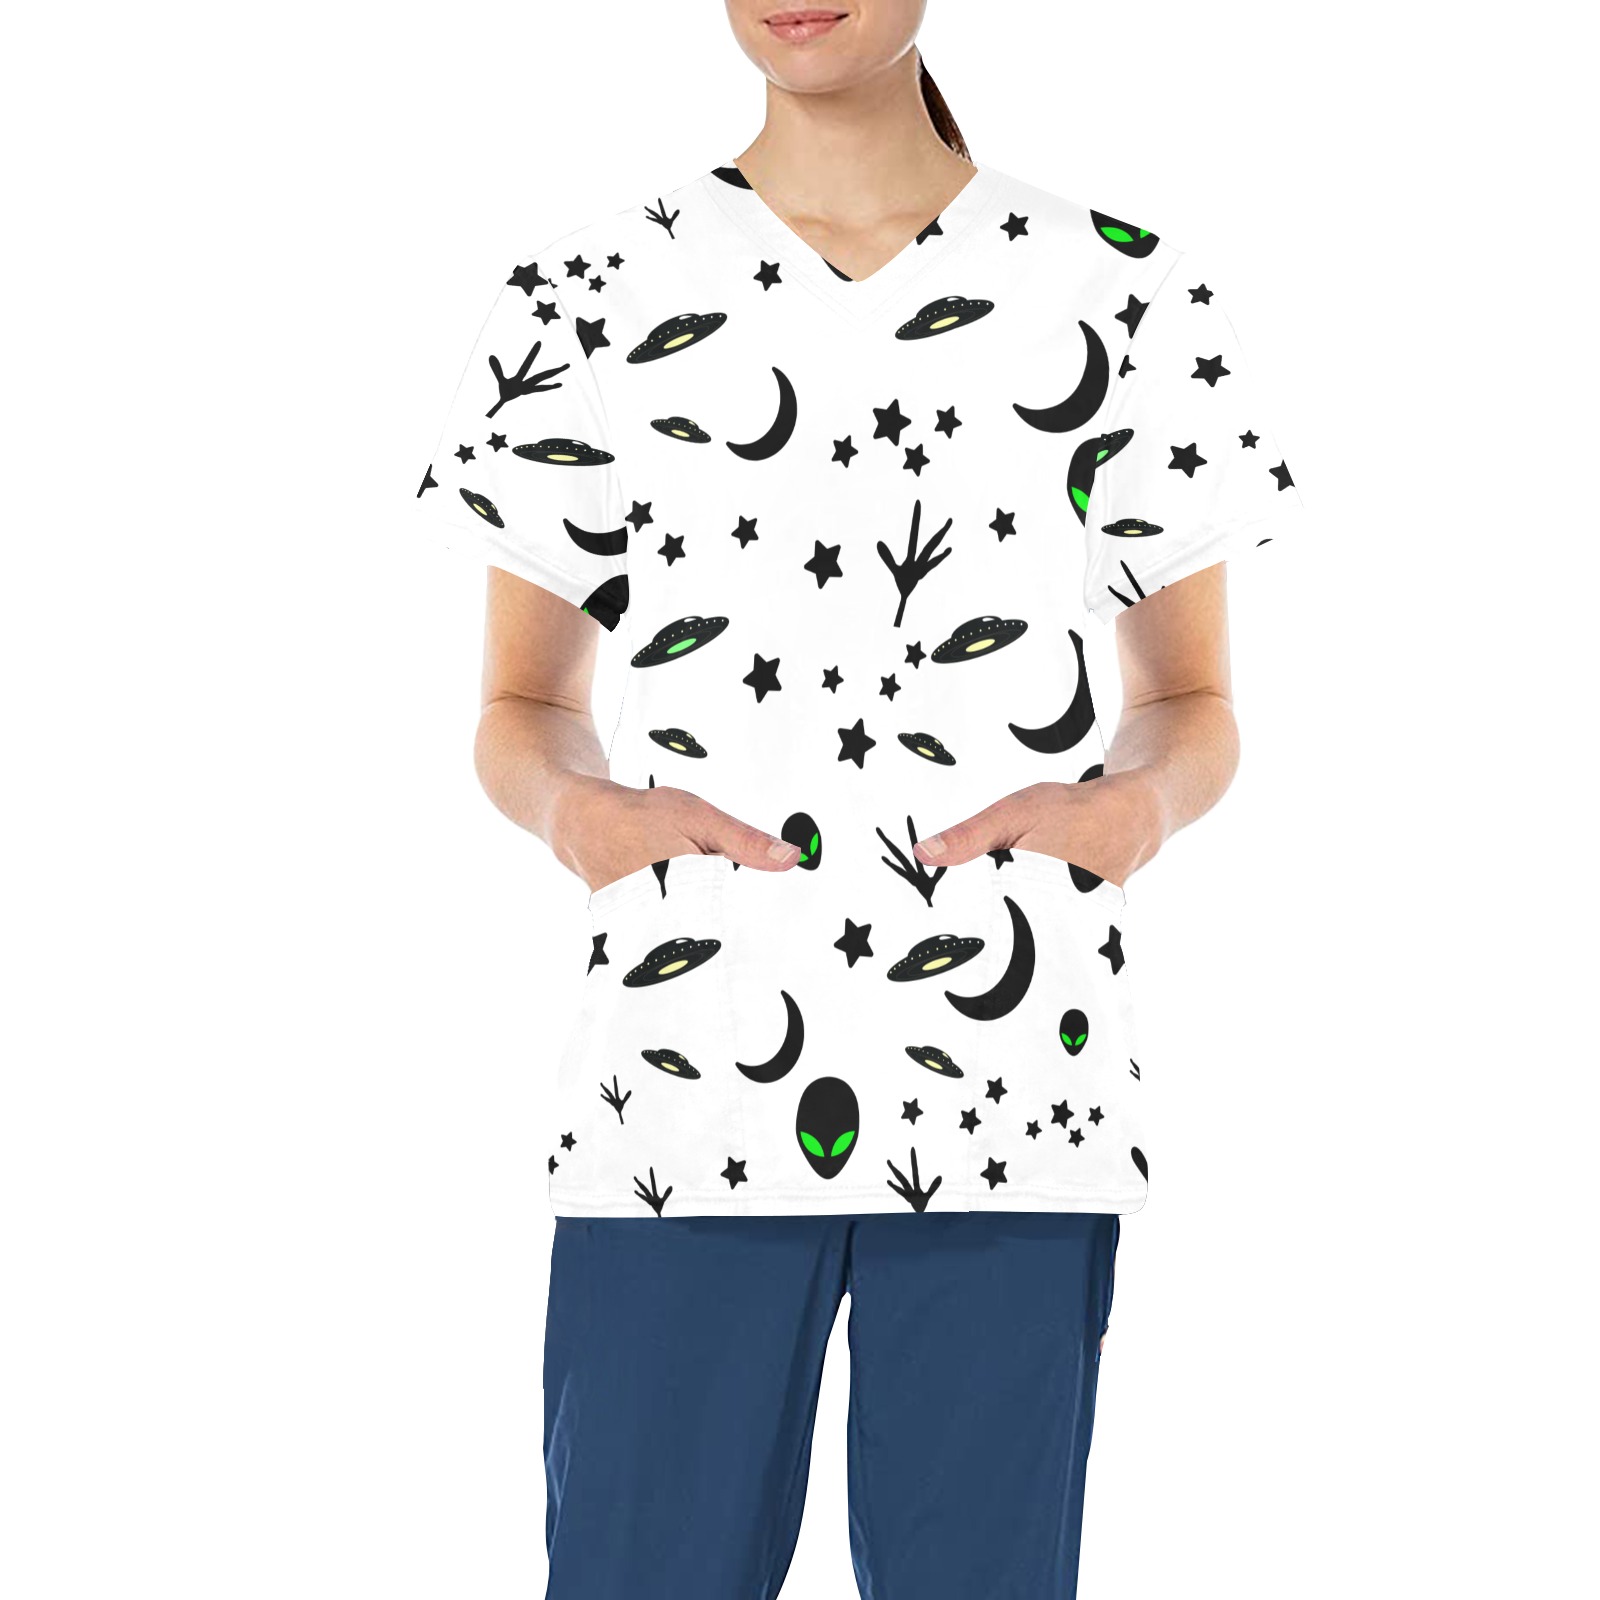 Aliens and Spaceships - White All Over Print Scrub Top